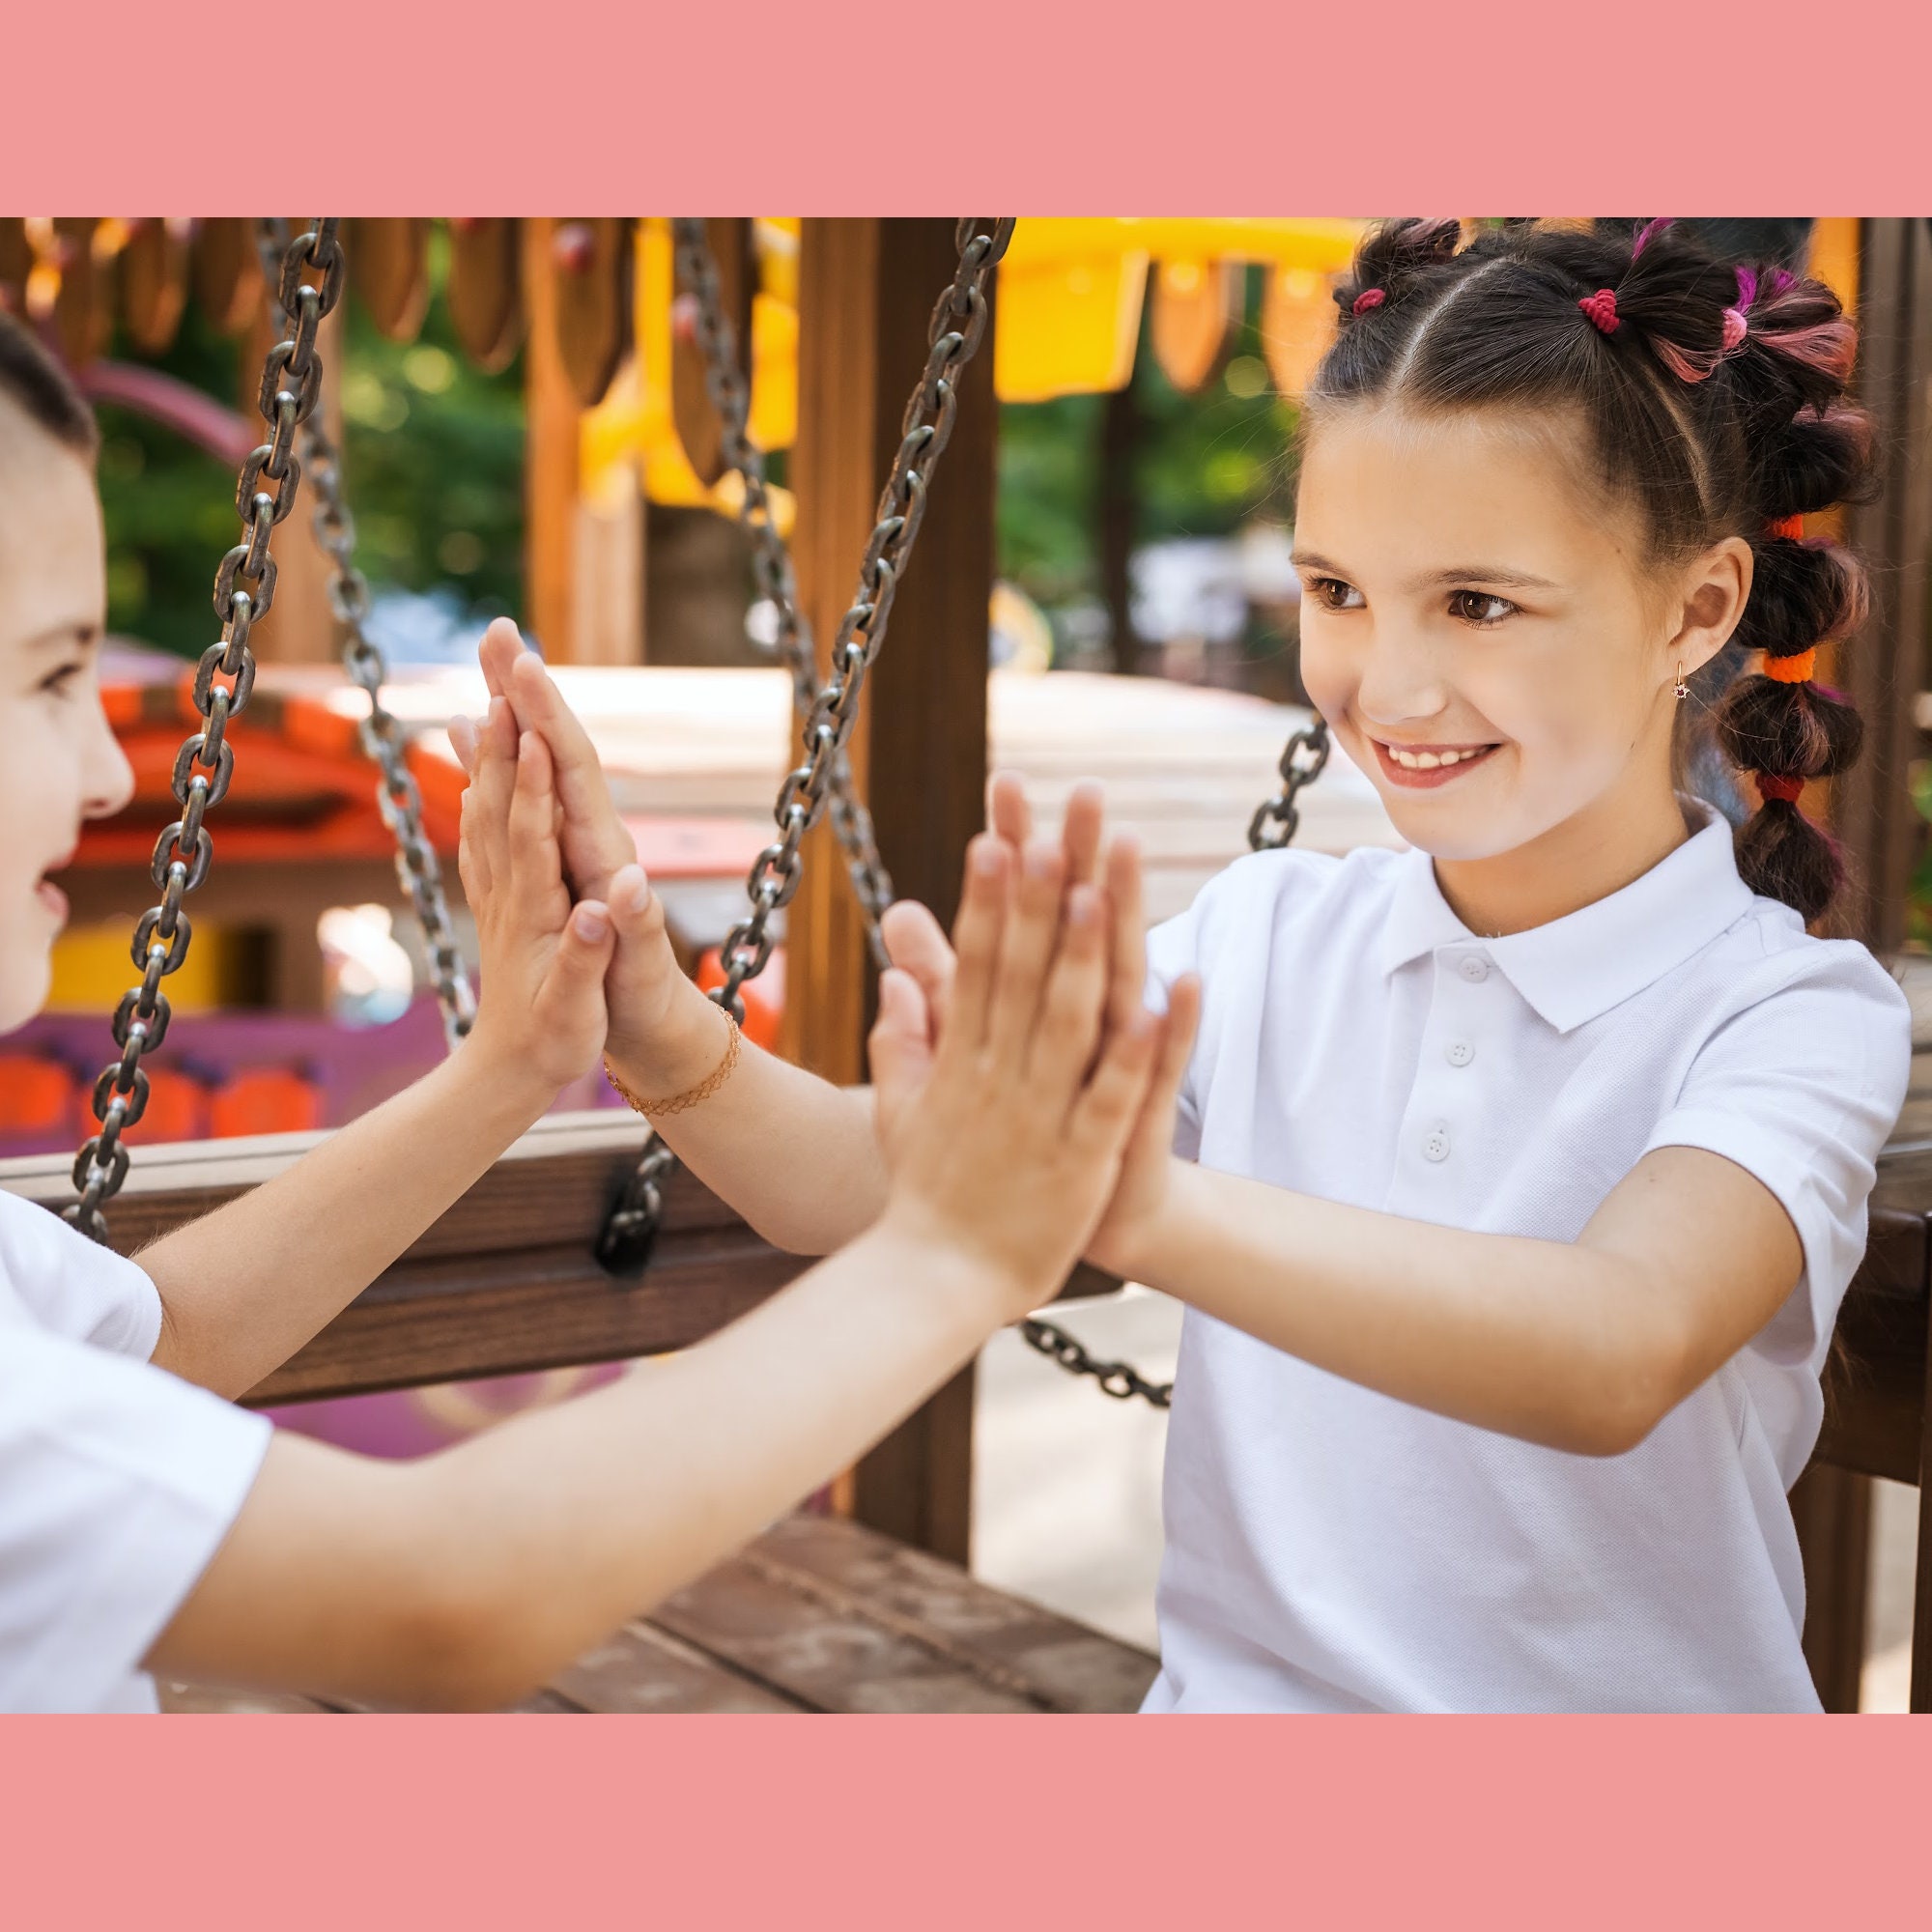 10 Classic hand-clapping games to teach your kid - Today's Parent